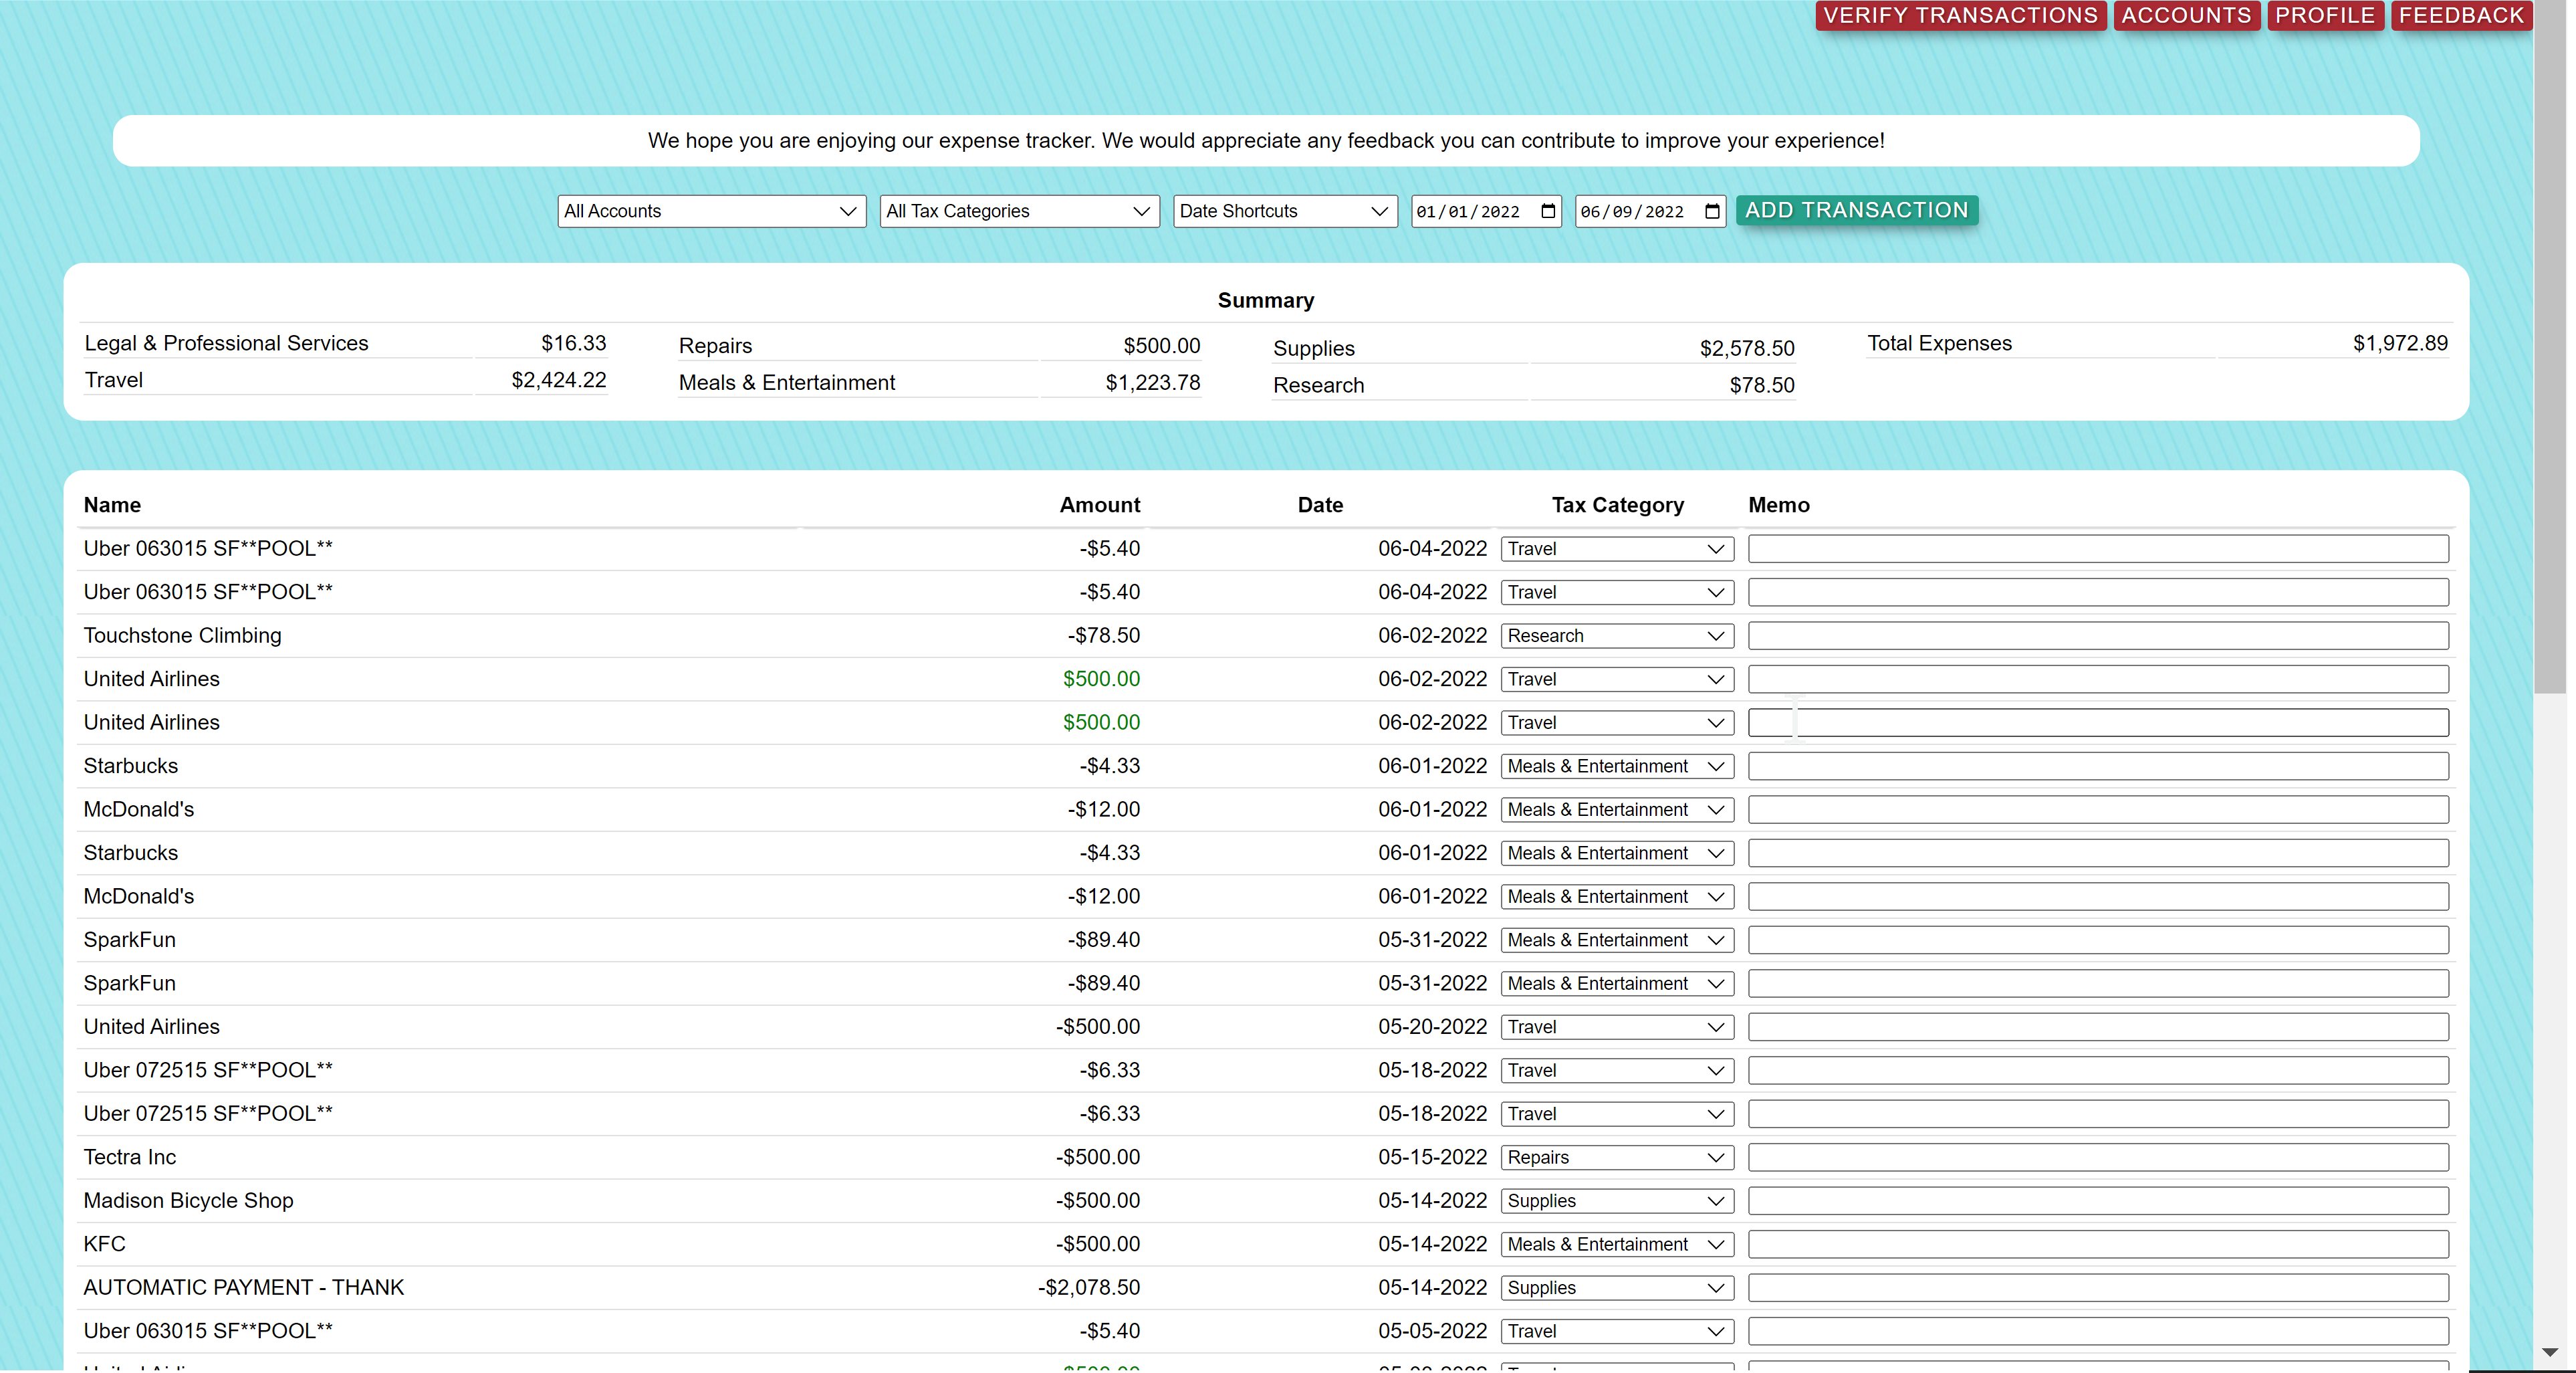 Expense Tracker Dashboard showing data filters and several rows of transaction data along with tax categories.